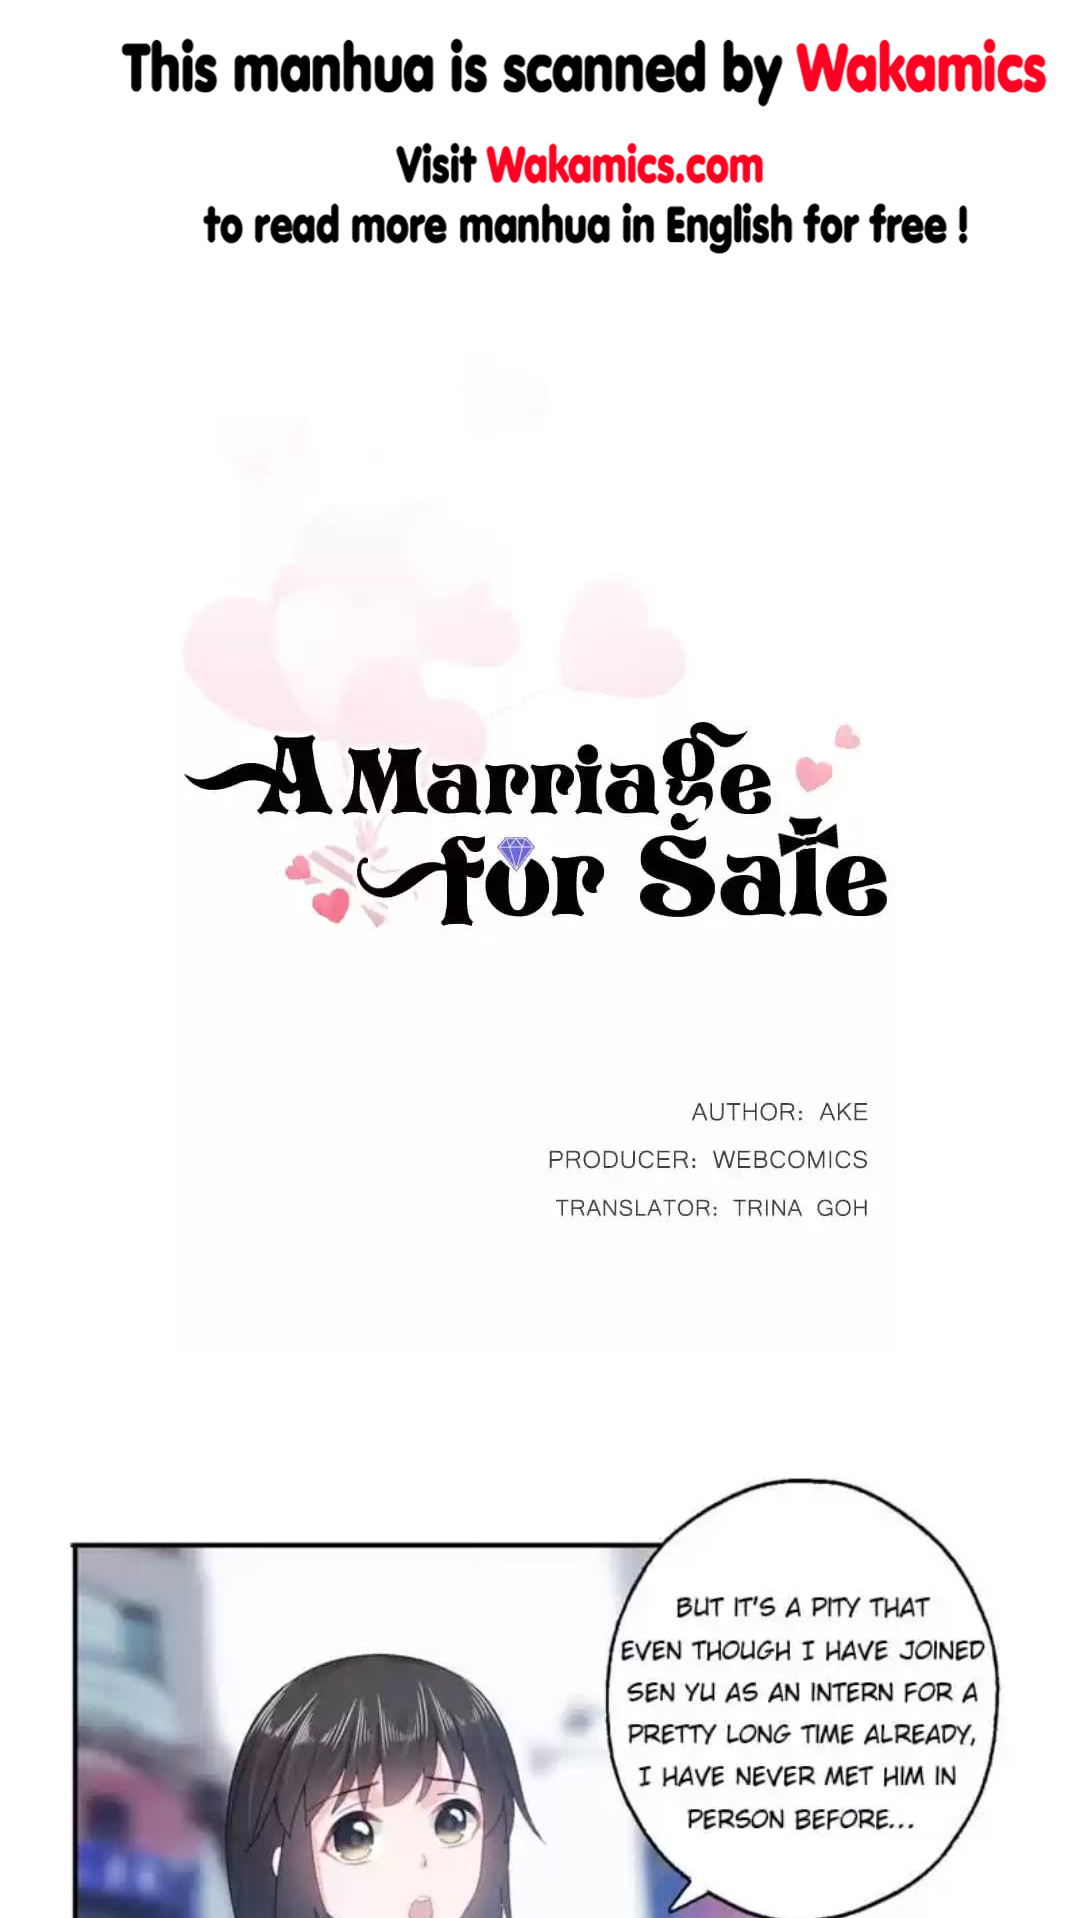 A Marriage For Sale - Page 1